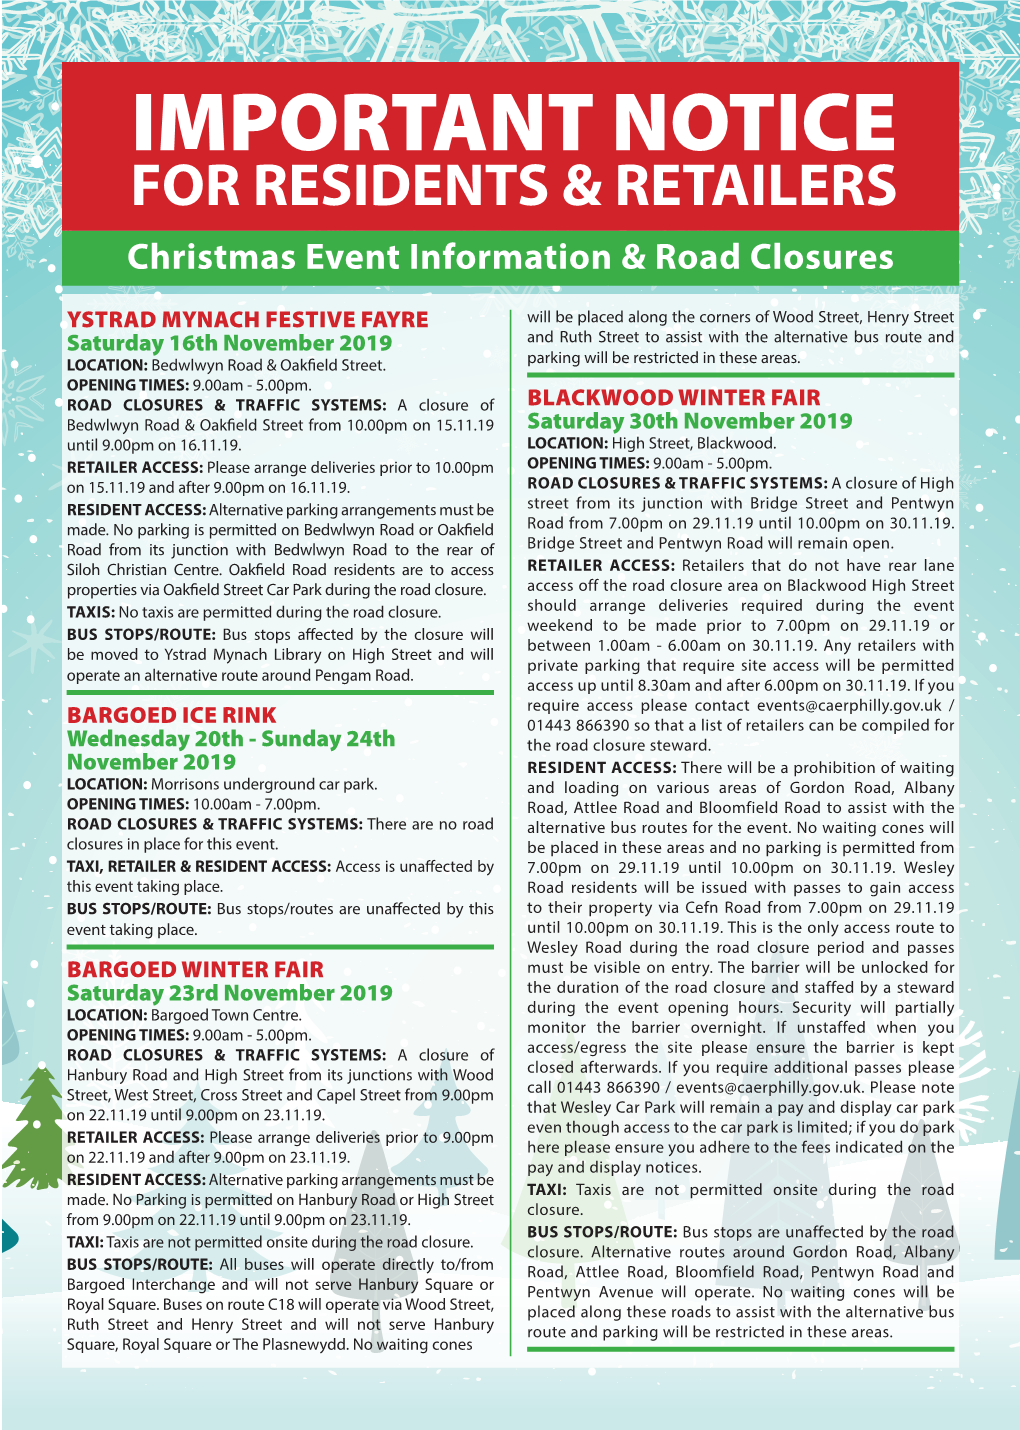 Christmas Event Information & Road Closures